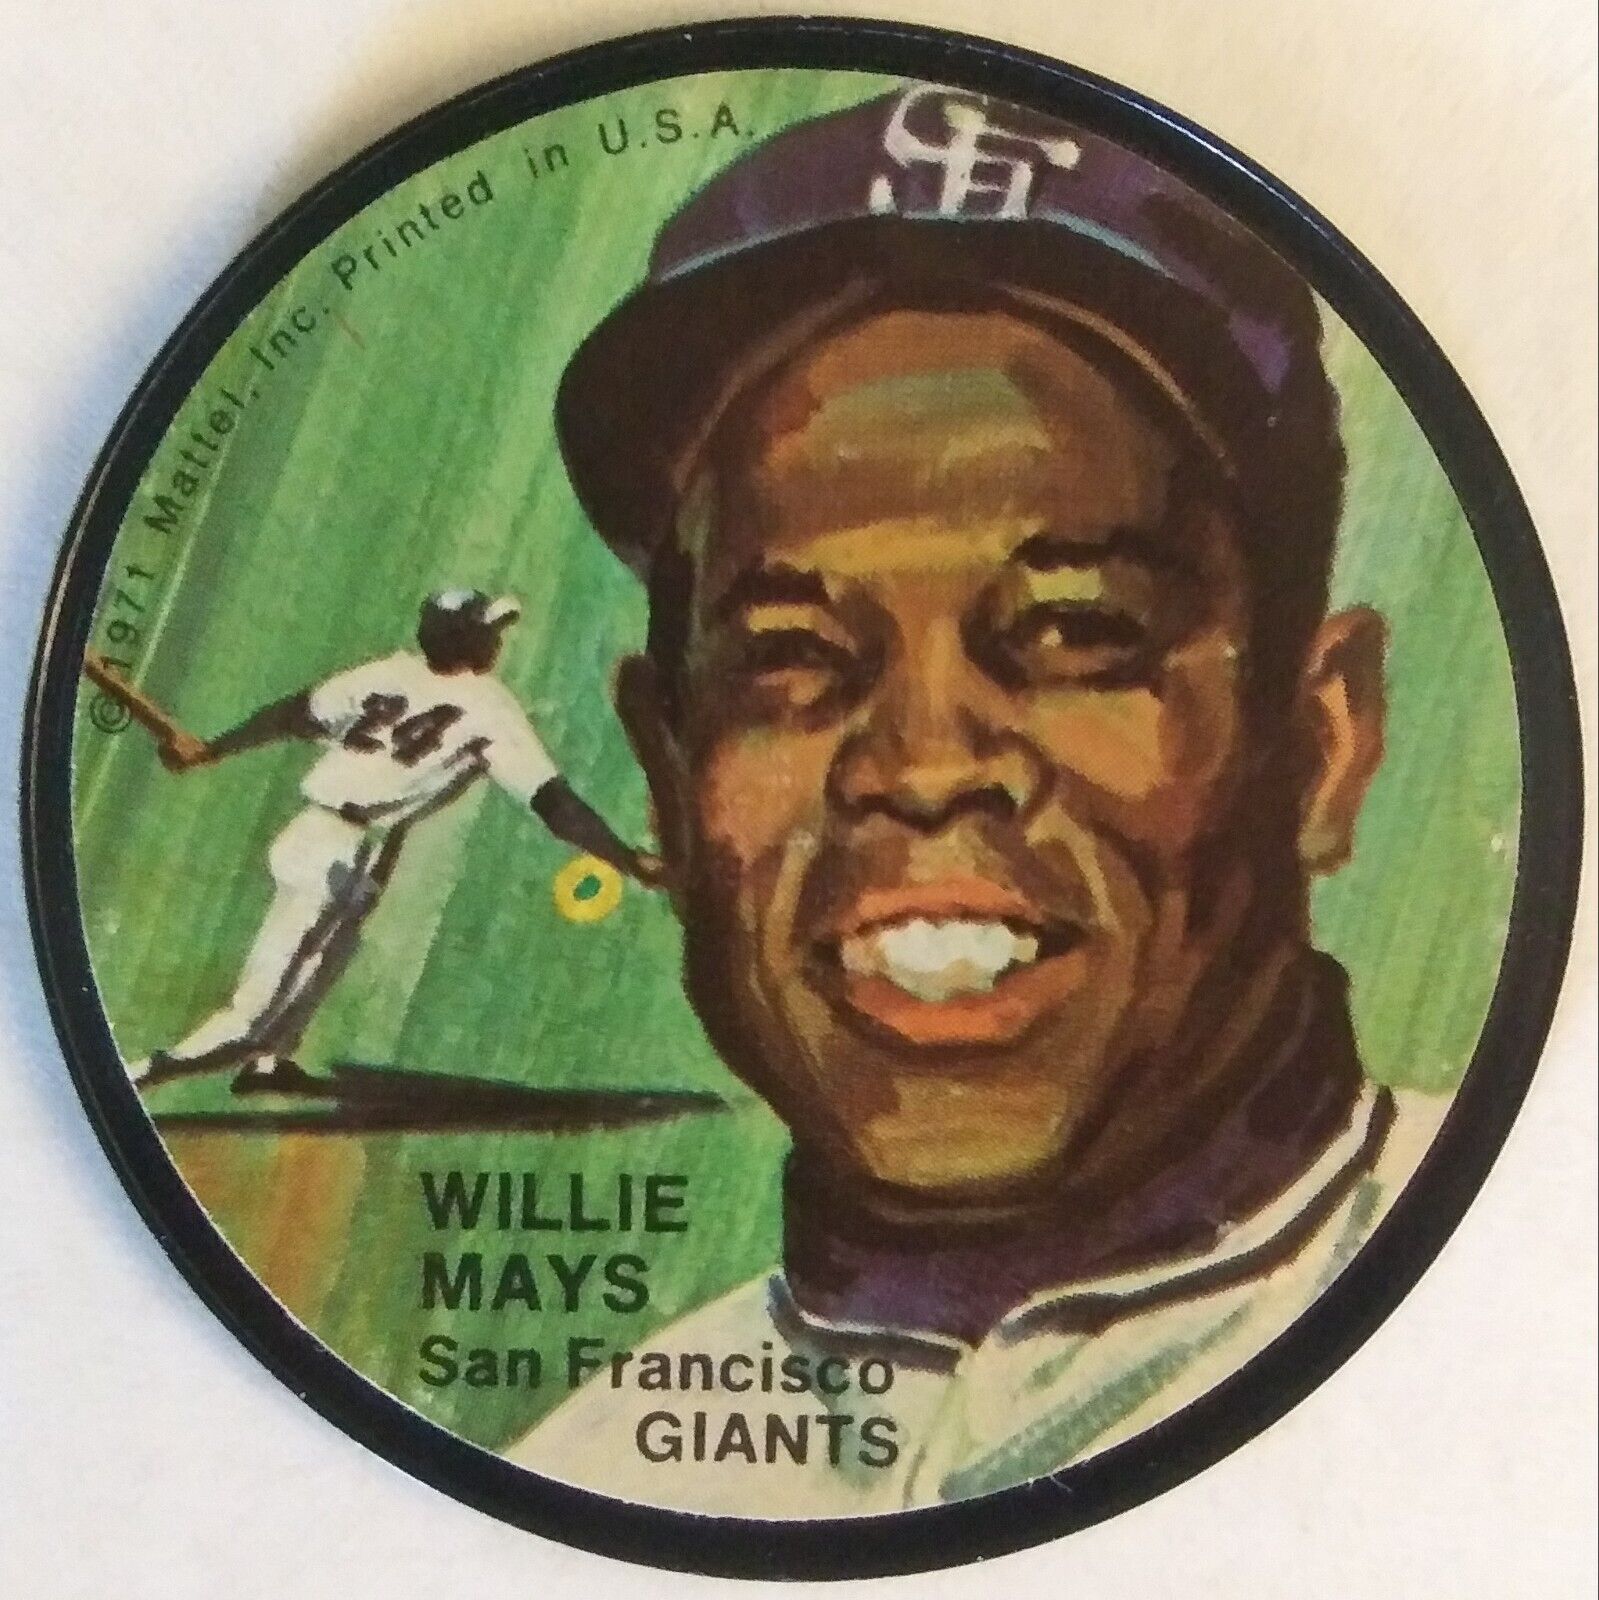 1971 Mattel Instant Replay WILLIE MAYS Single-Sided Record - Light Play Wear